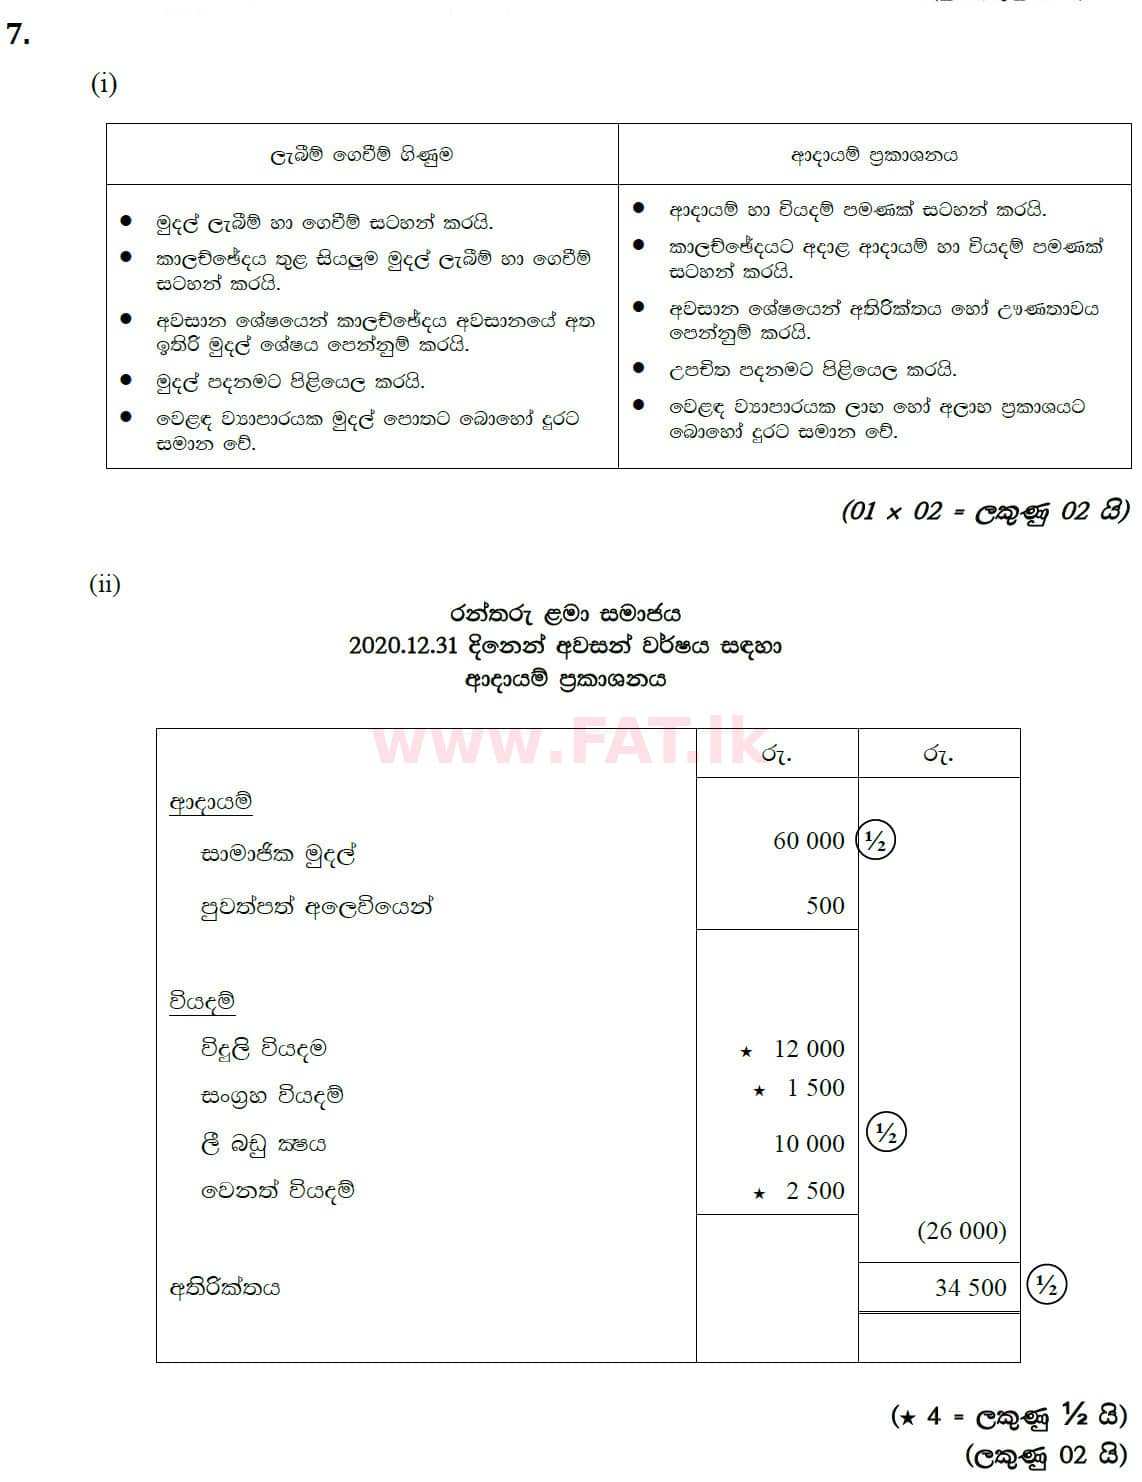 National Syllabus : Ordinary Level (O/L) Business and Accounting Studies - 2020 March - Paper II (සිංහල Medium) 7 5771